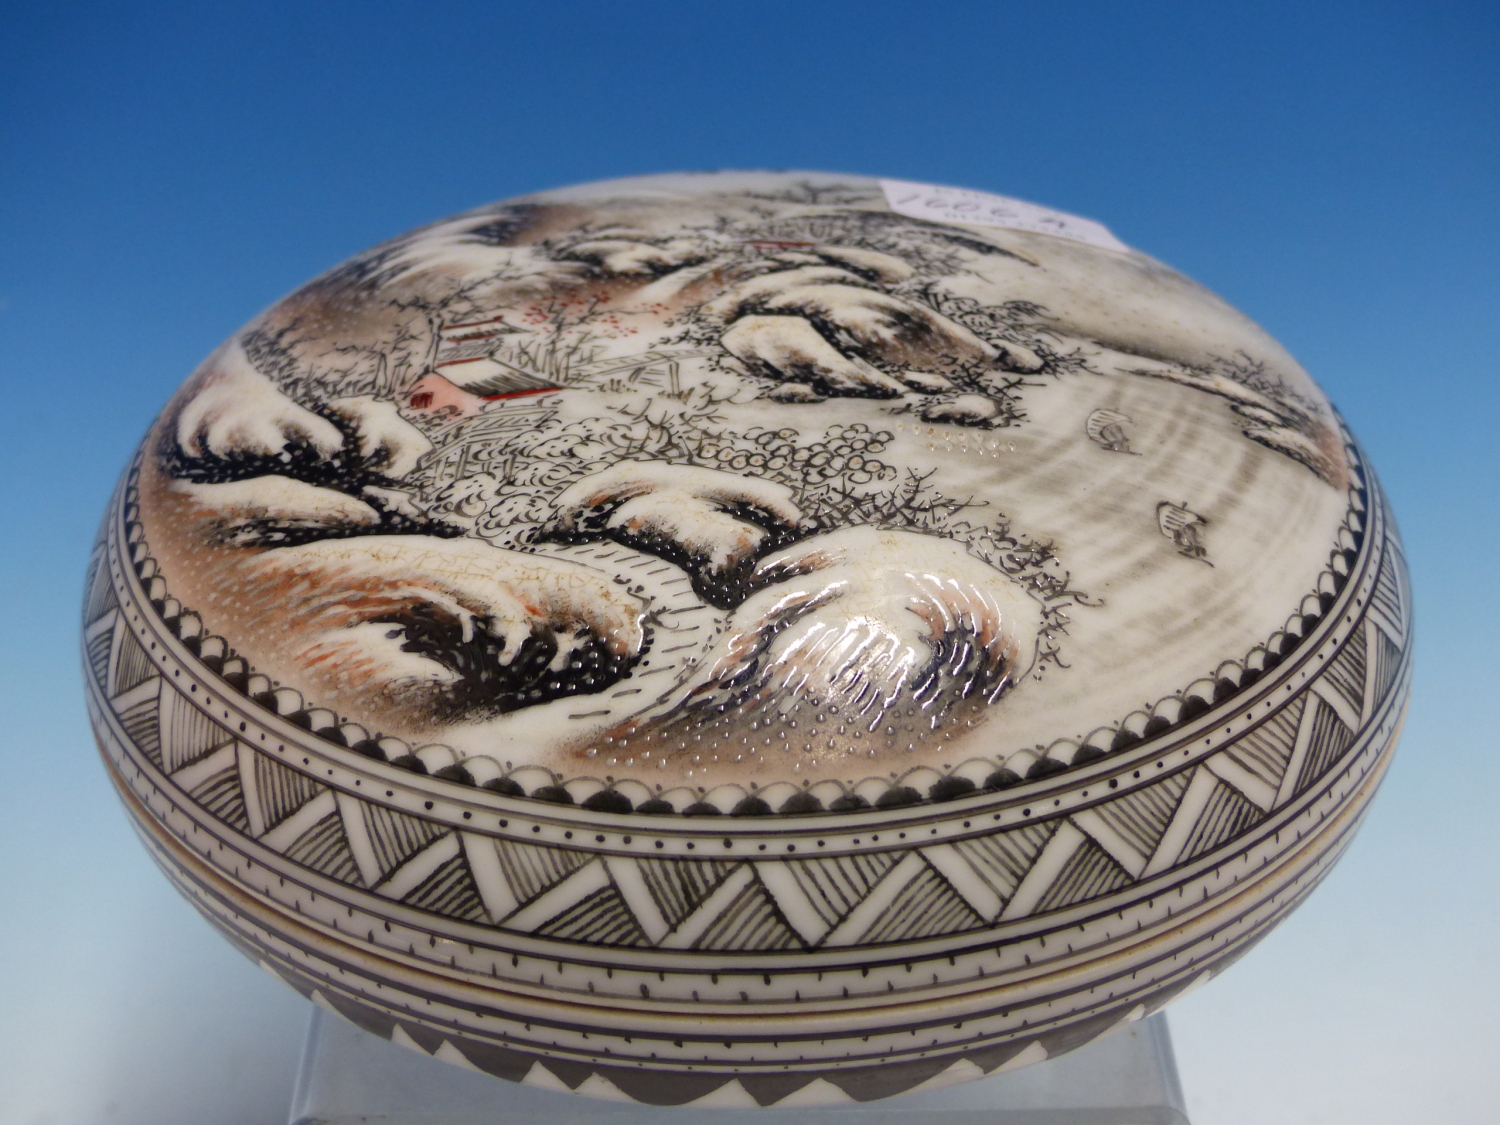 A CHINESE CIRCULAR COVERED BOX, DECORATED WITH A WINTER LANDSCAPE AND INSCRIPTION, CHARACTER MARK